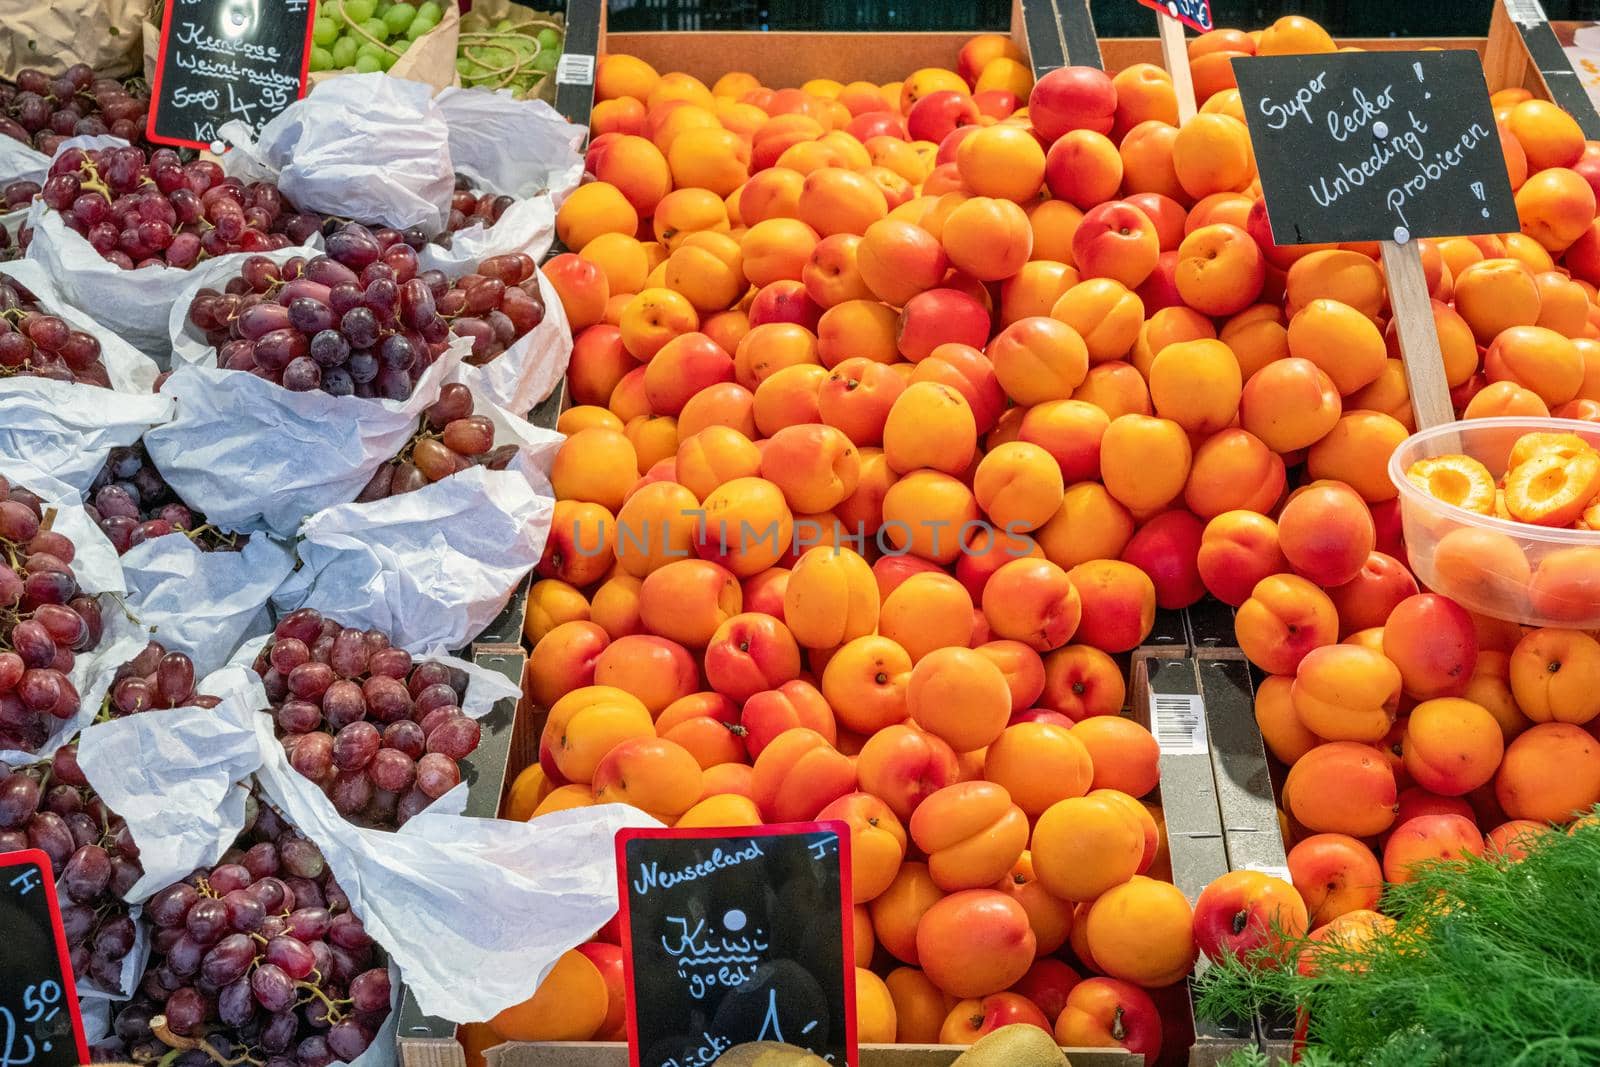 Mirabelle plums and grapes for sale at a market